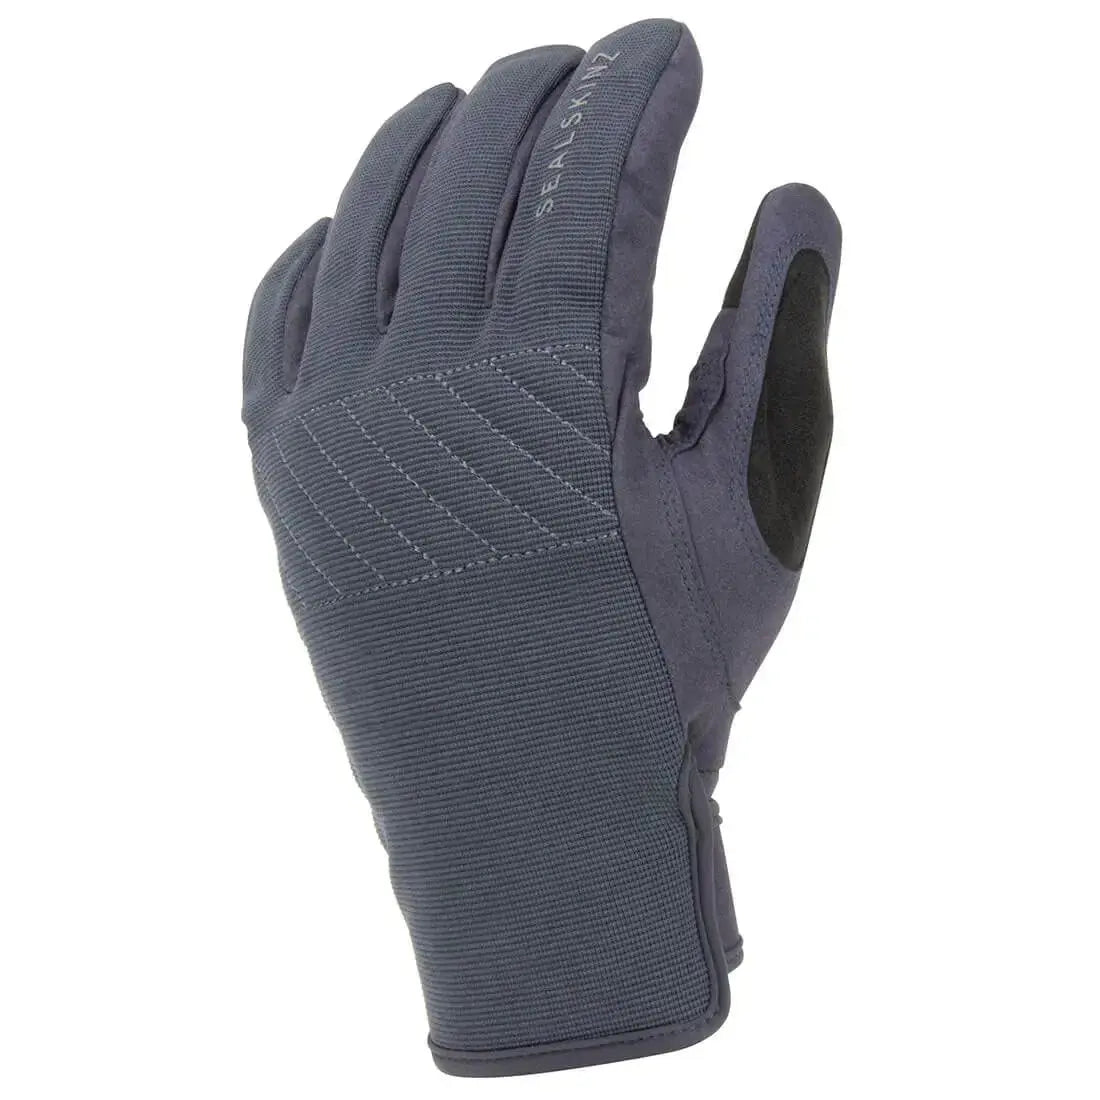 Sealskinz Waterproof All Weather Glove with Fusion Control - John Bull Clothing